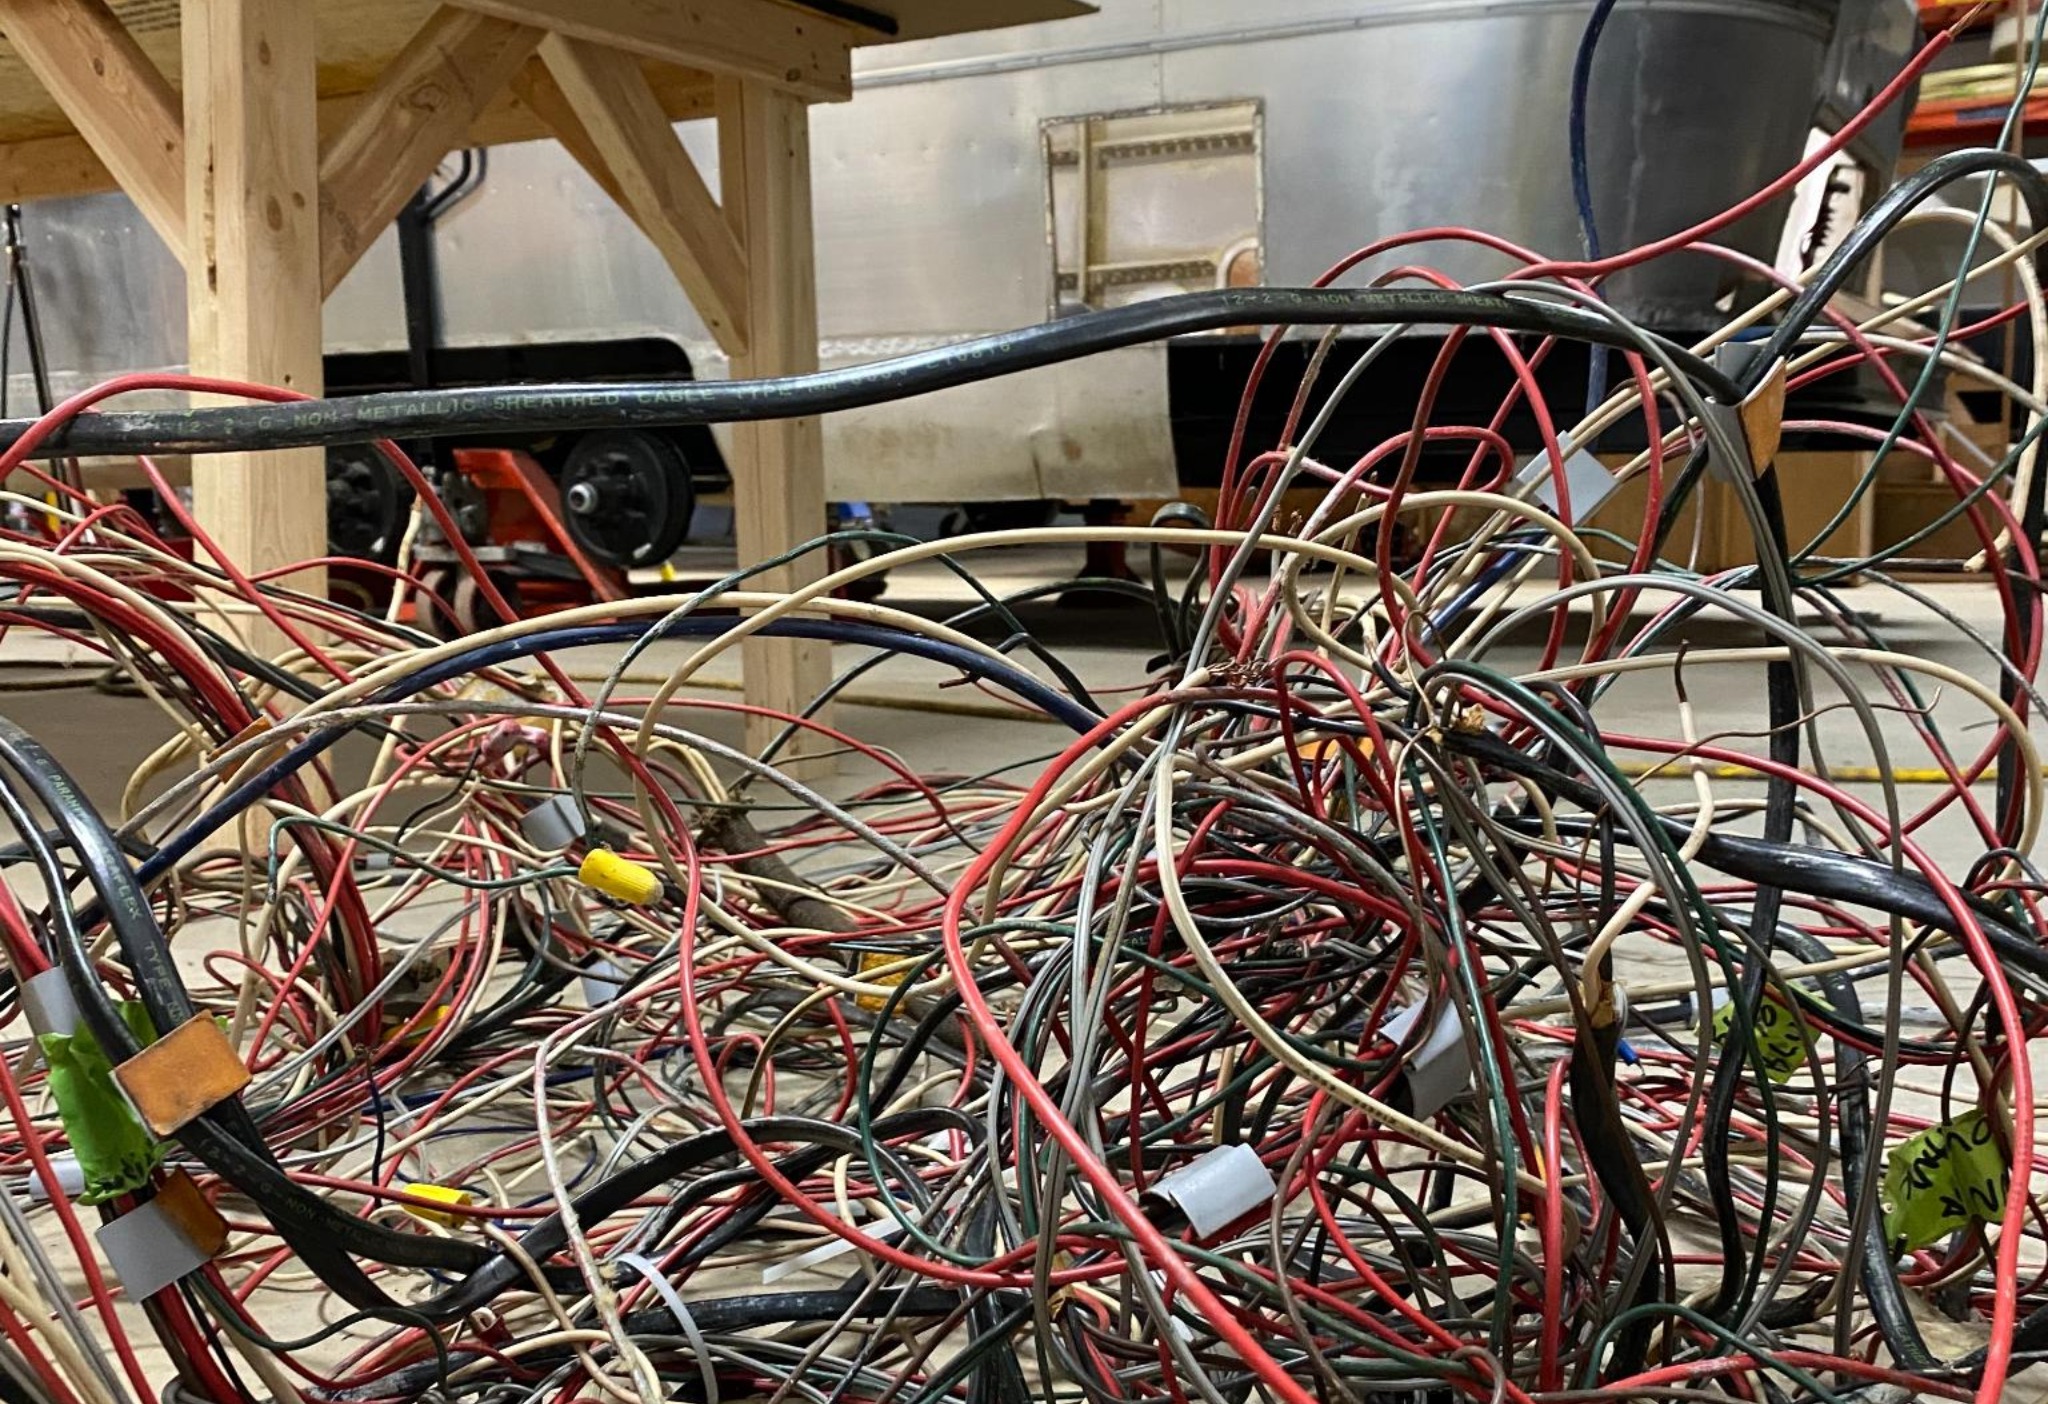   Old Electrical Hazard Wiring Removal  ﻿